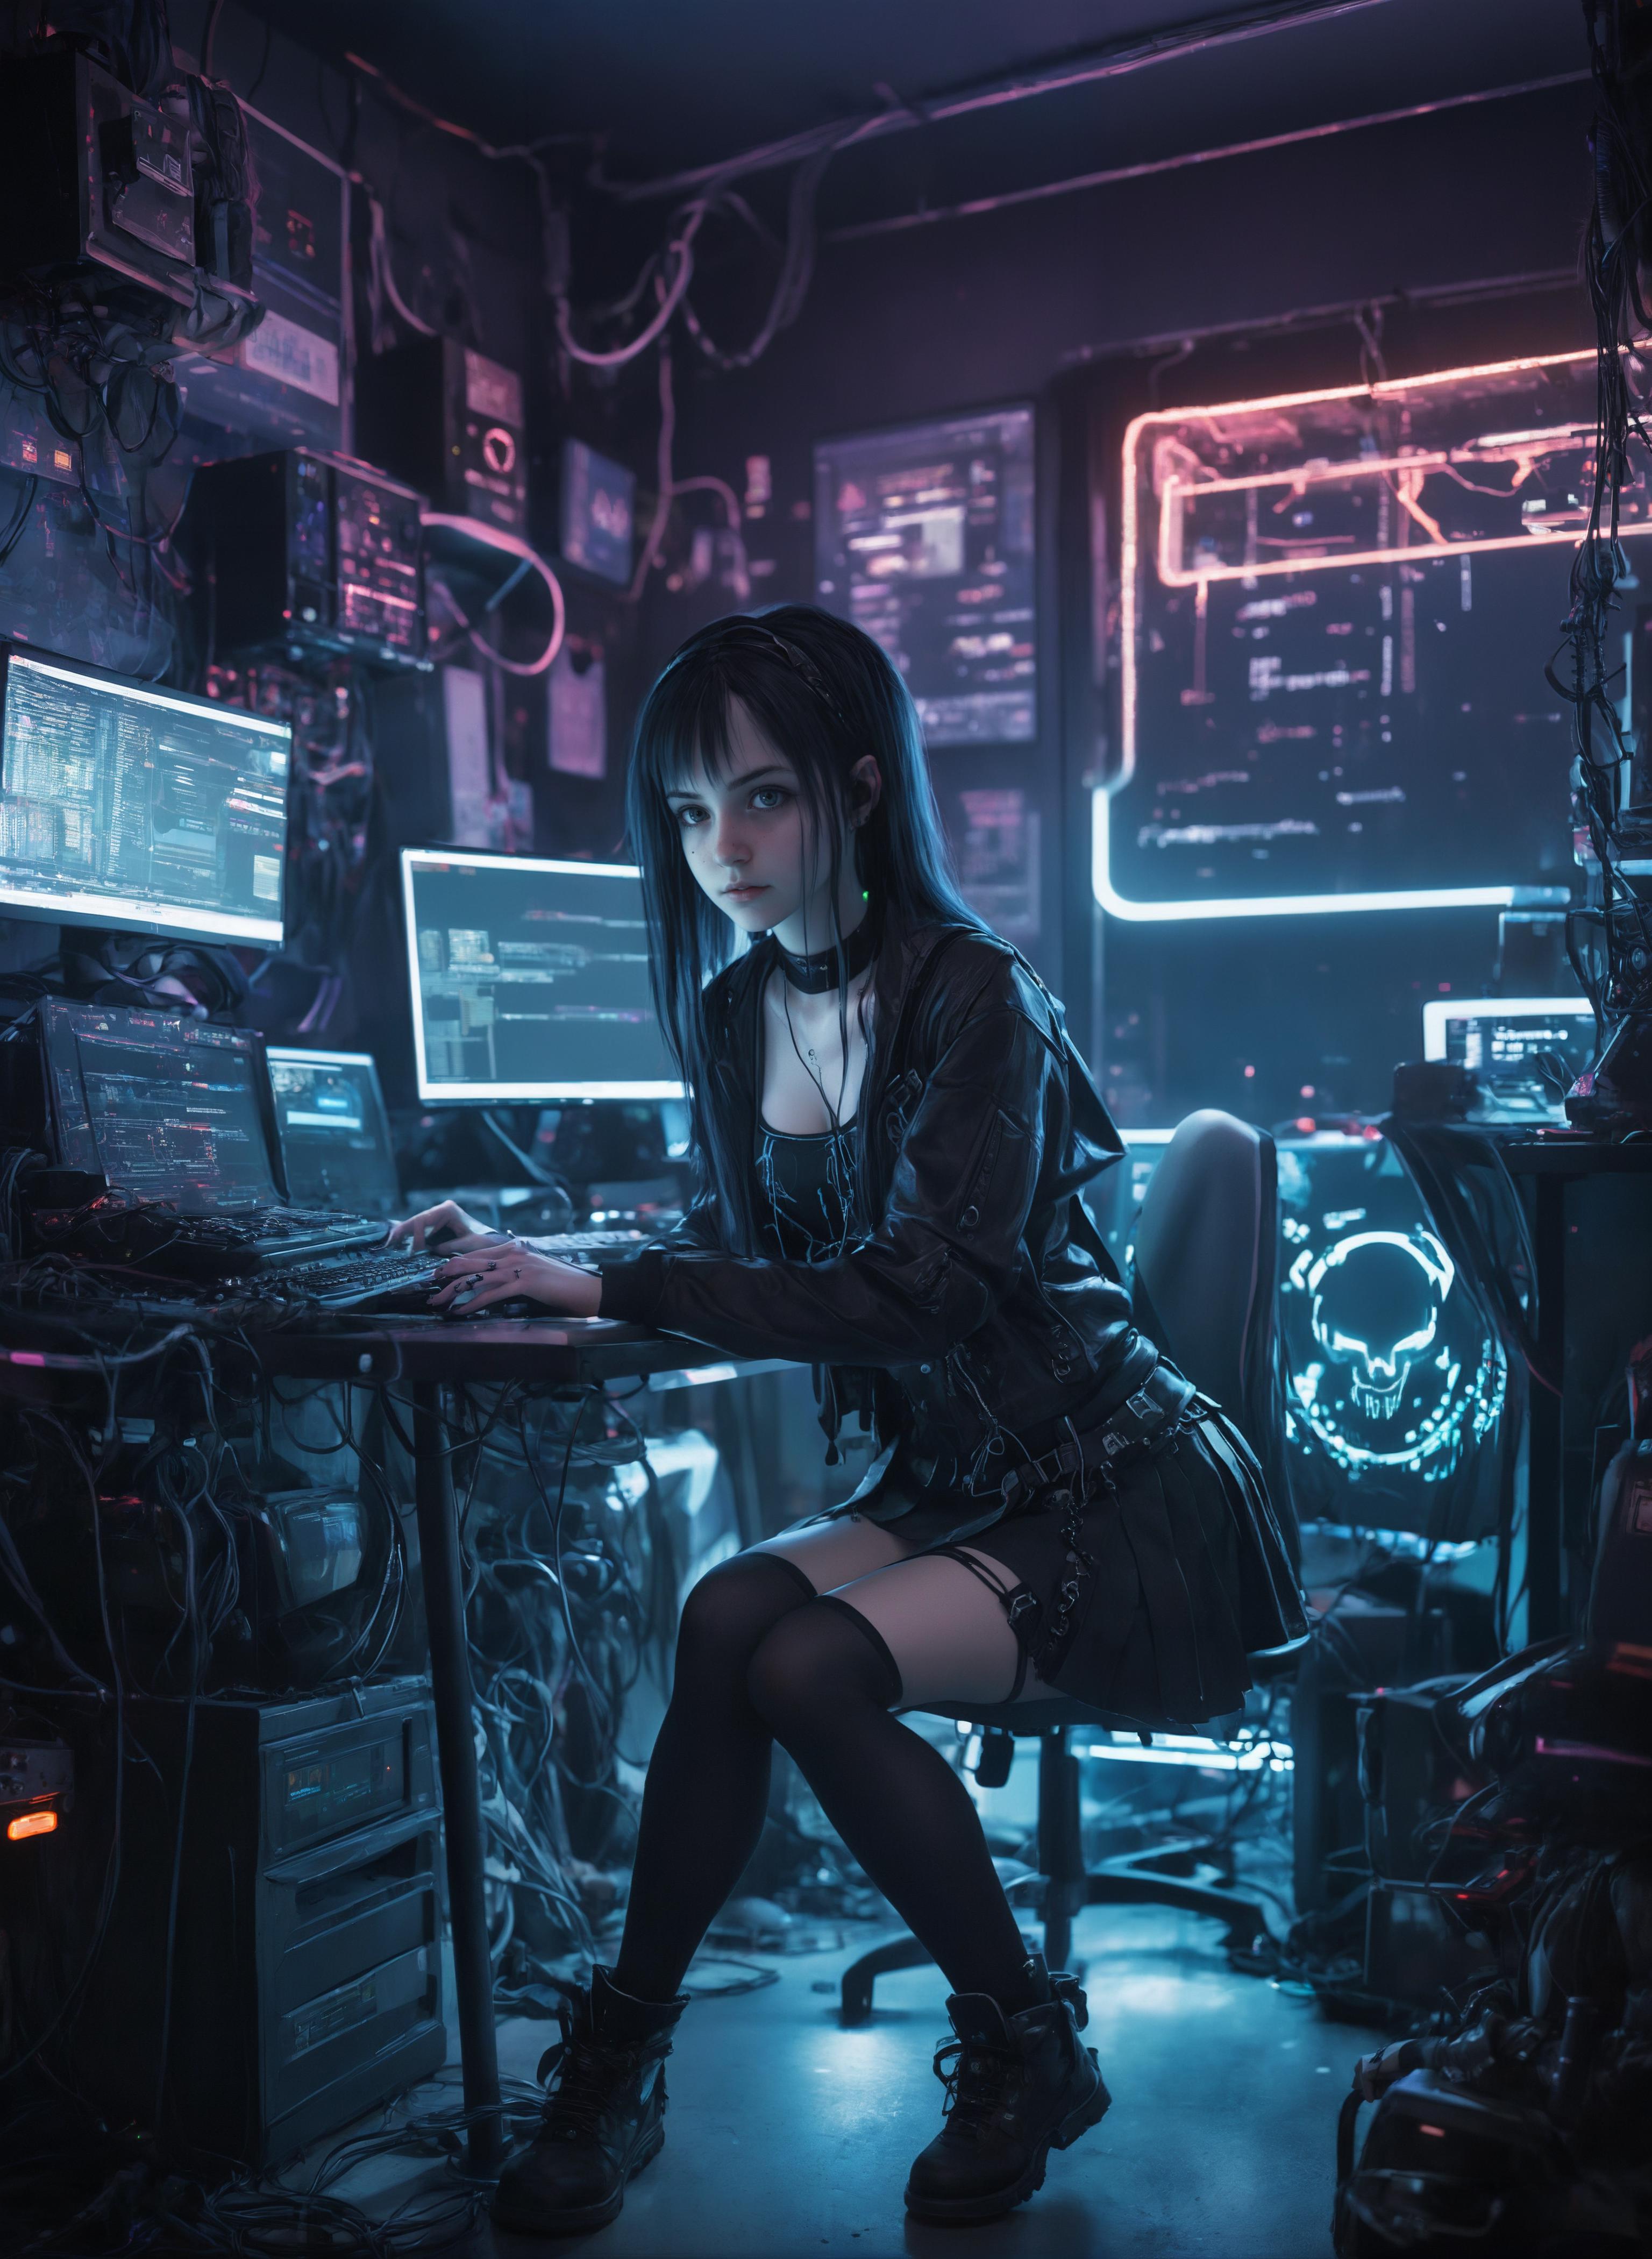 A woman in a black outfit sitting at a computer desk with multiple monitors.